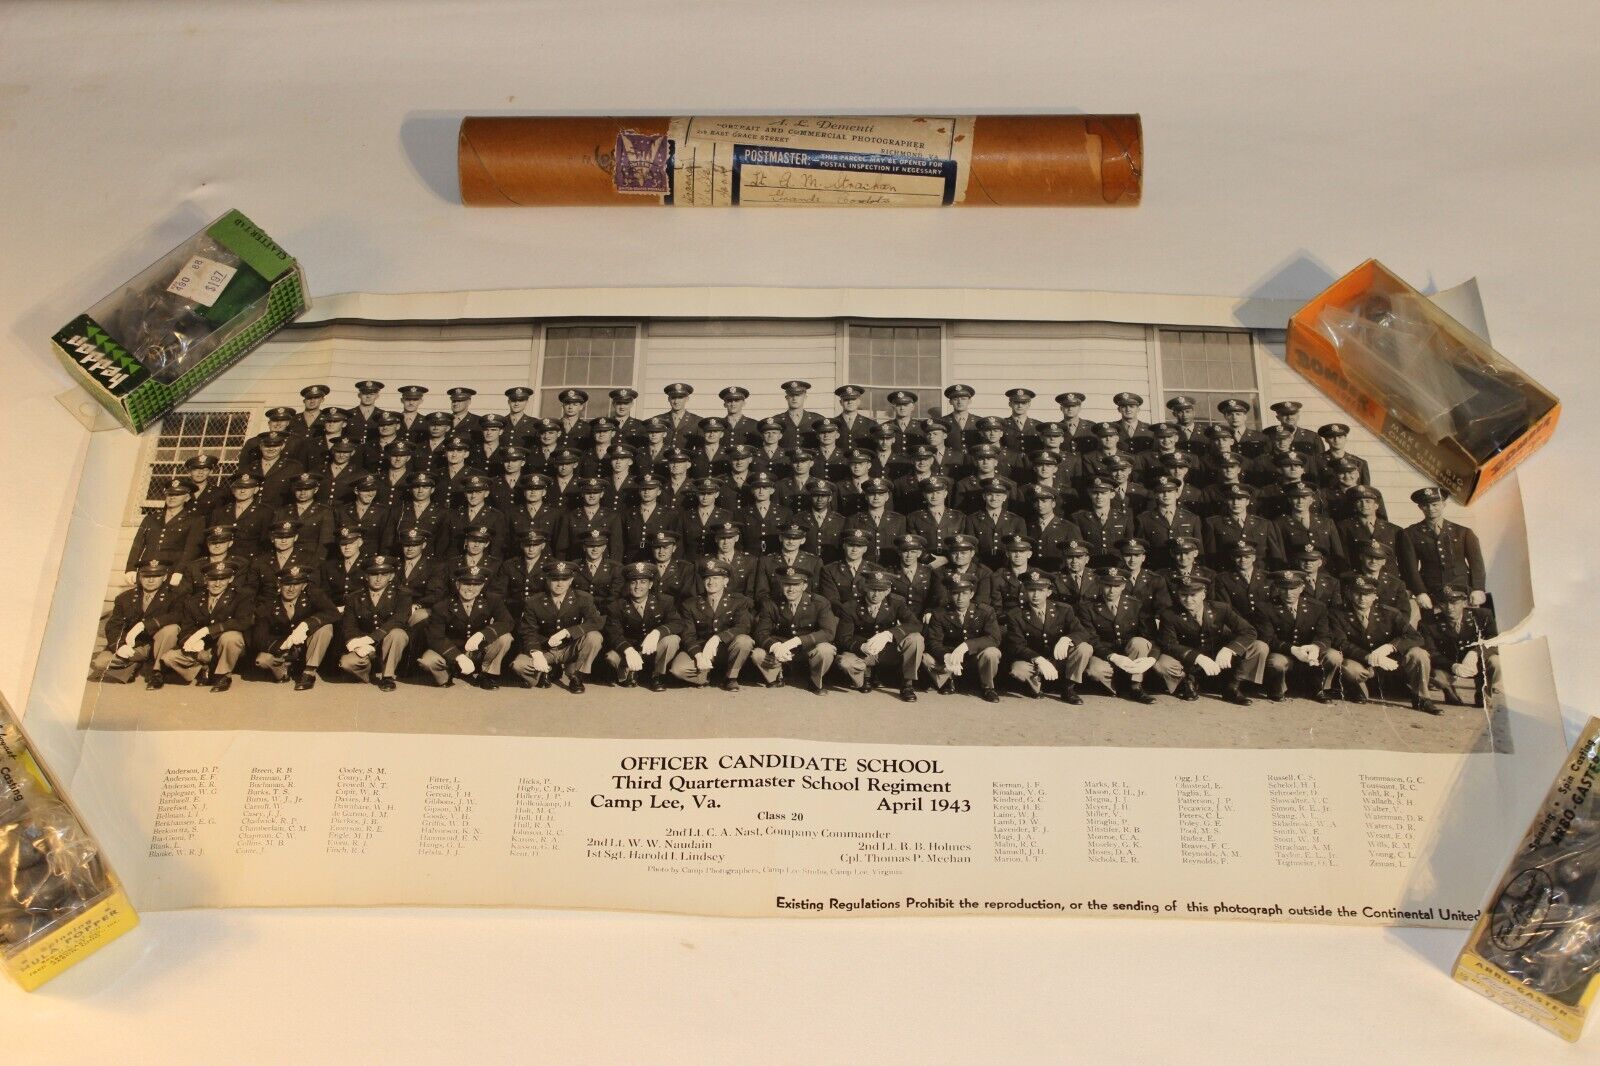 US ARMY 1943 WW2 OFFICER CANDIDATE SCHOOL Panoramic Photograph CAMP LEE VA